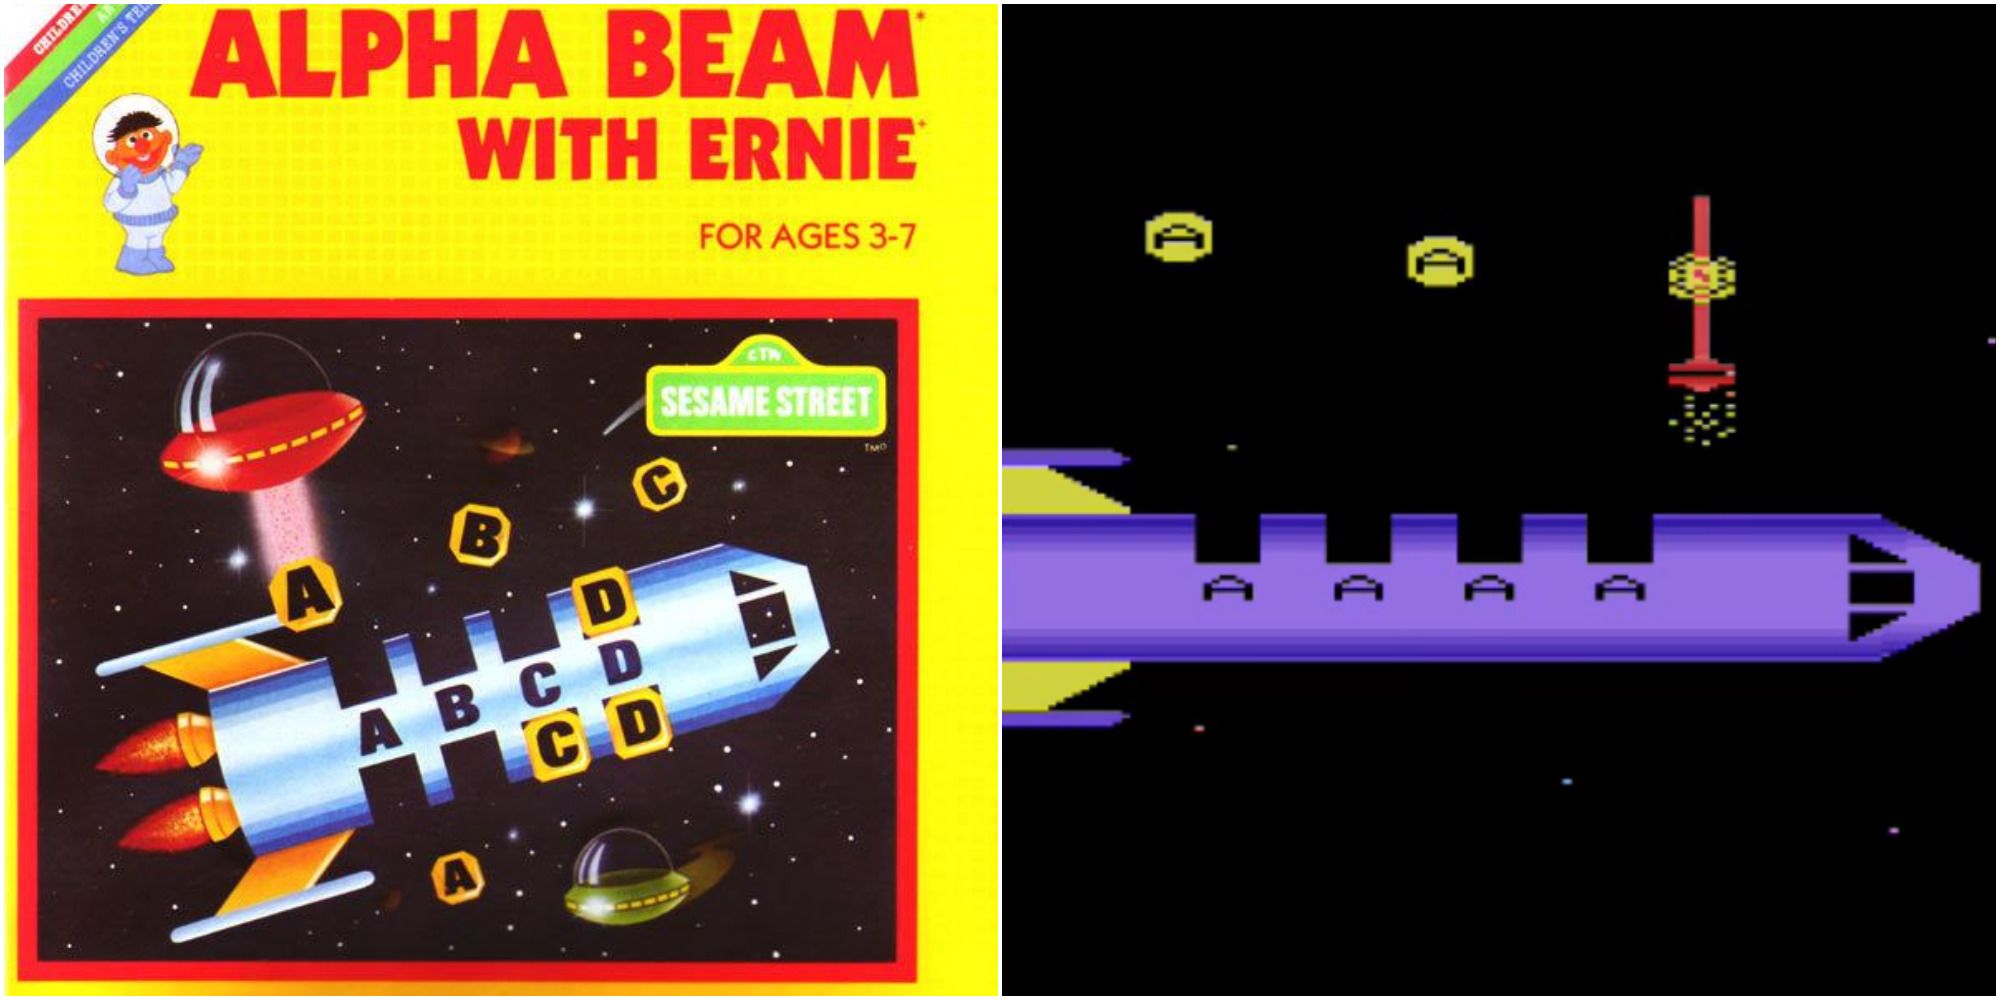 alpha beam with ernie cover & gameplay